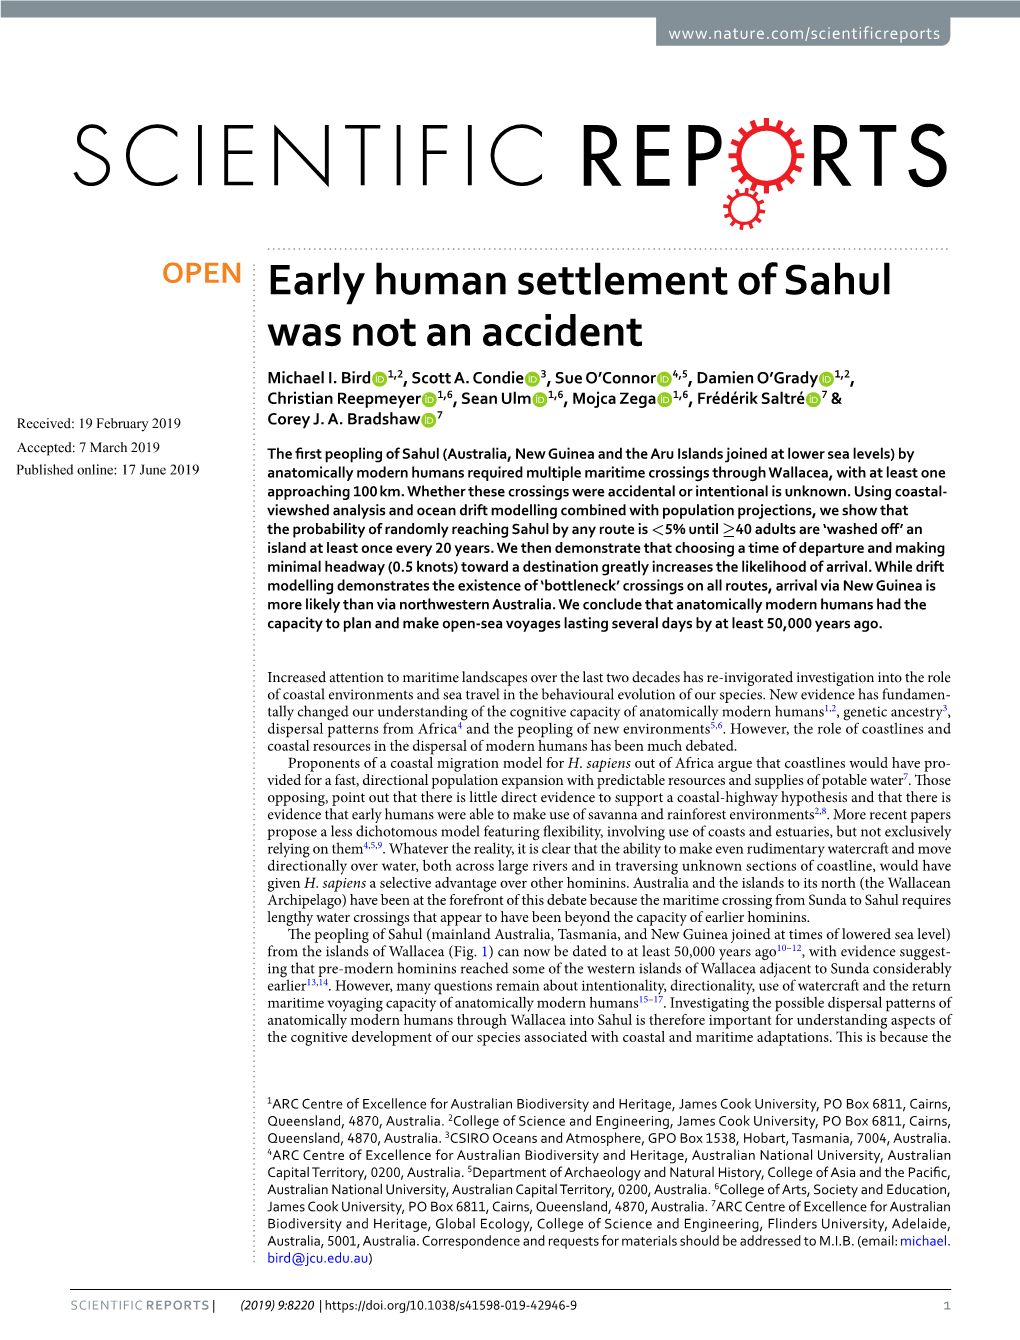 Early Human Settlement of Sahul Was Not an Accident Michael I